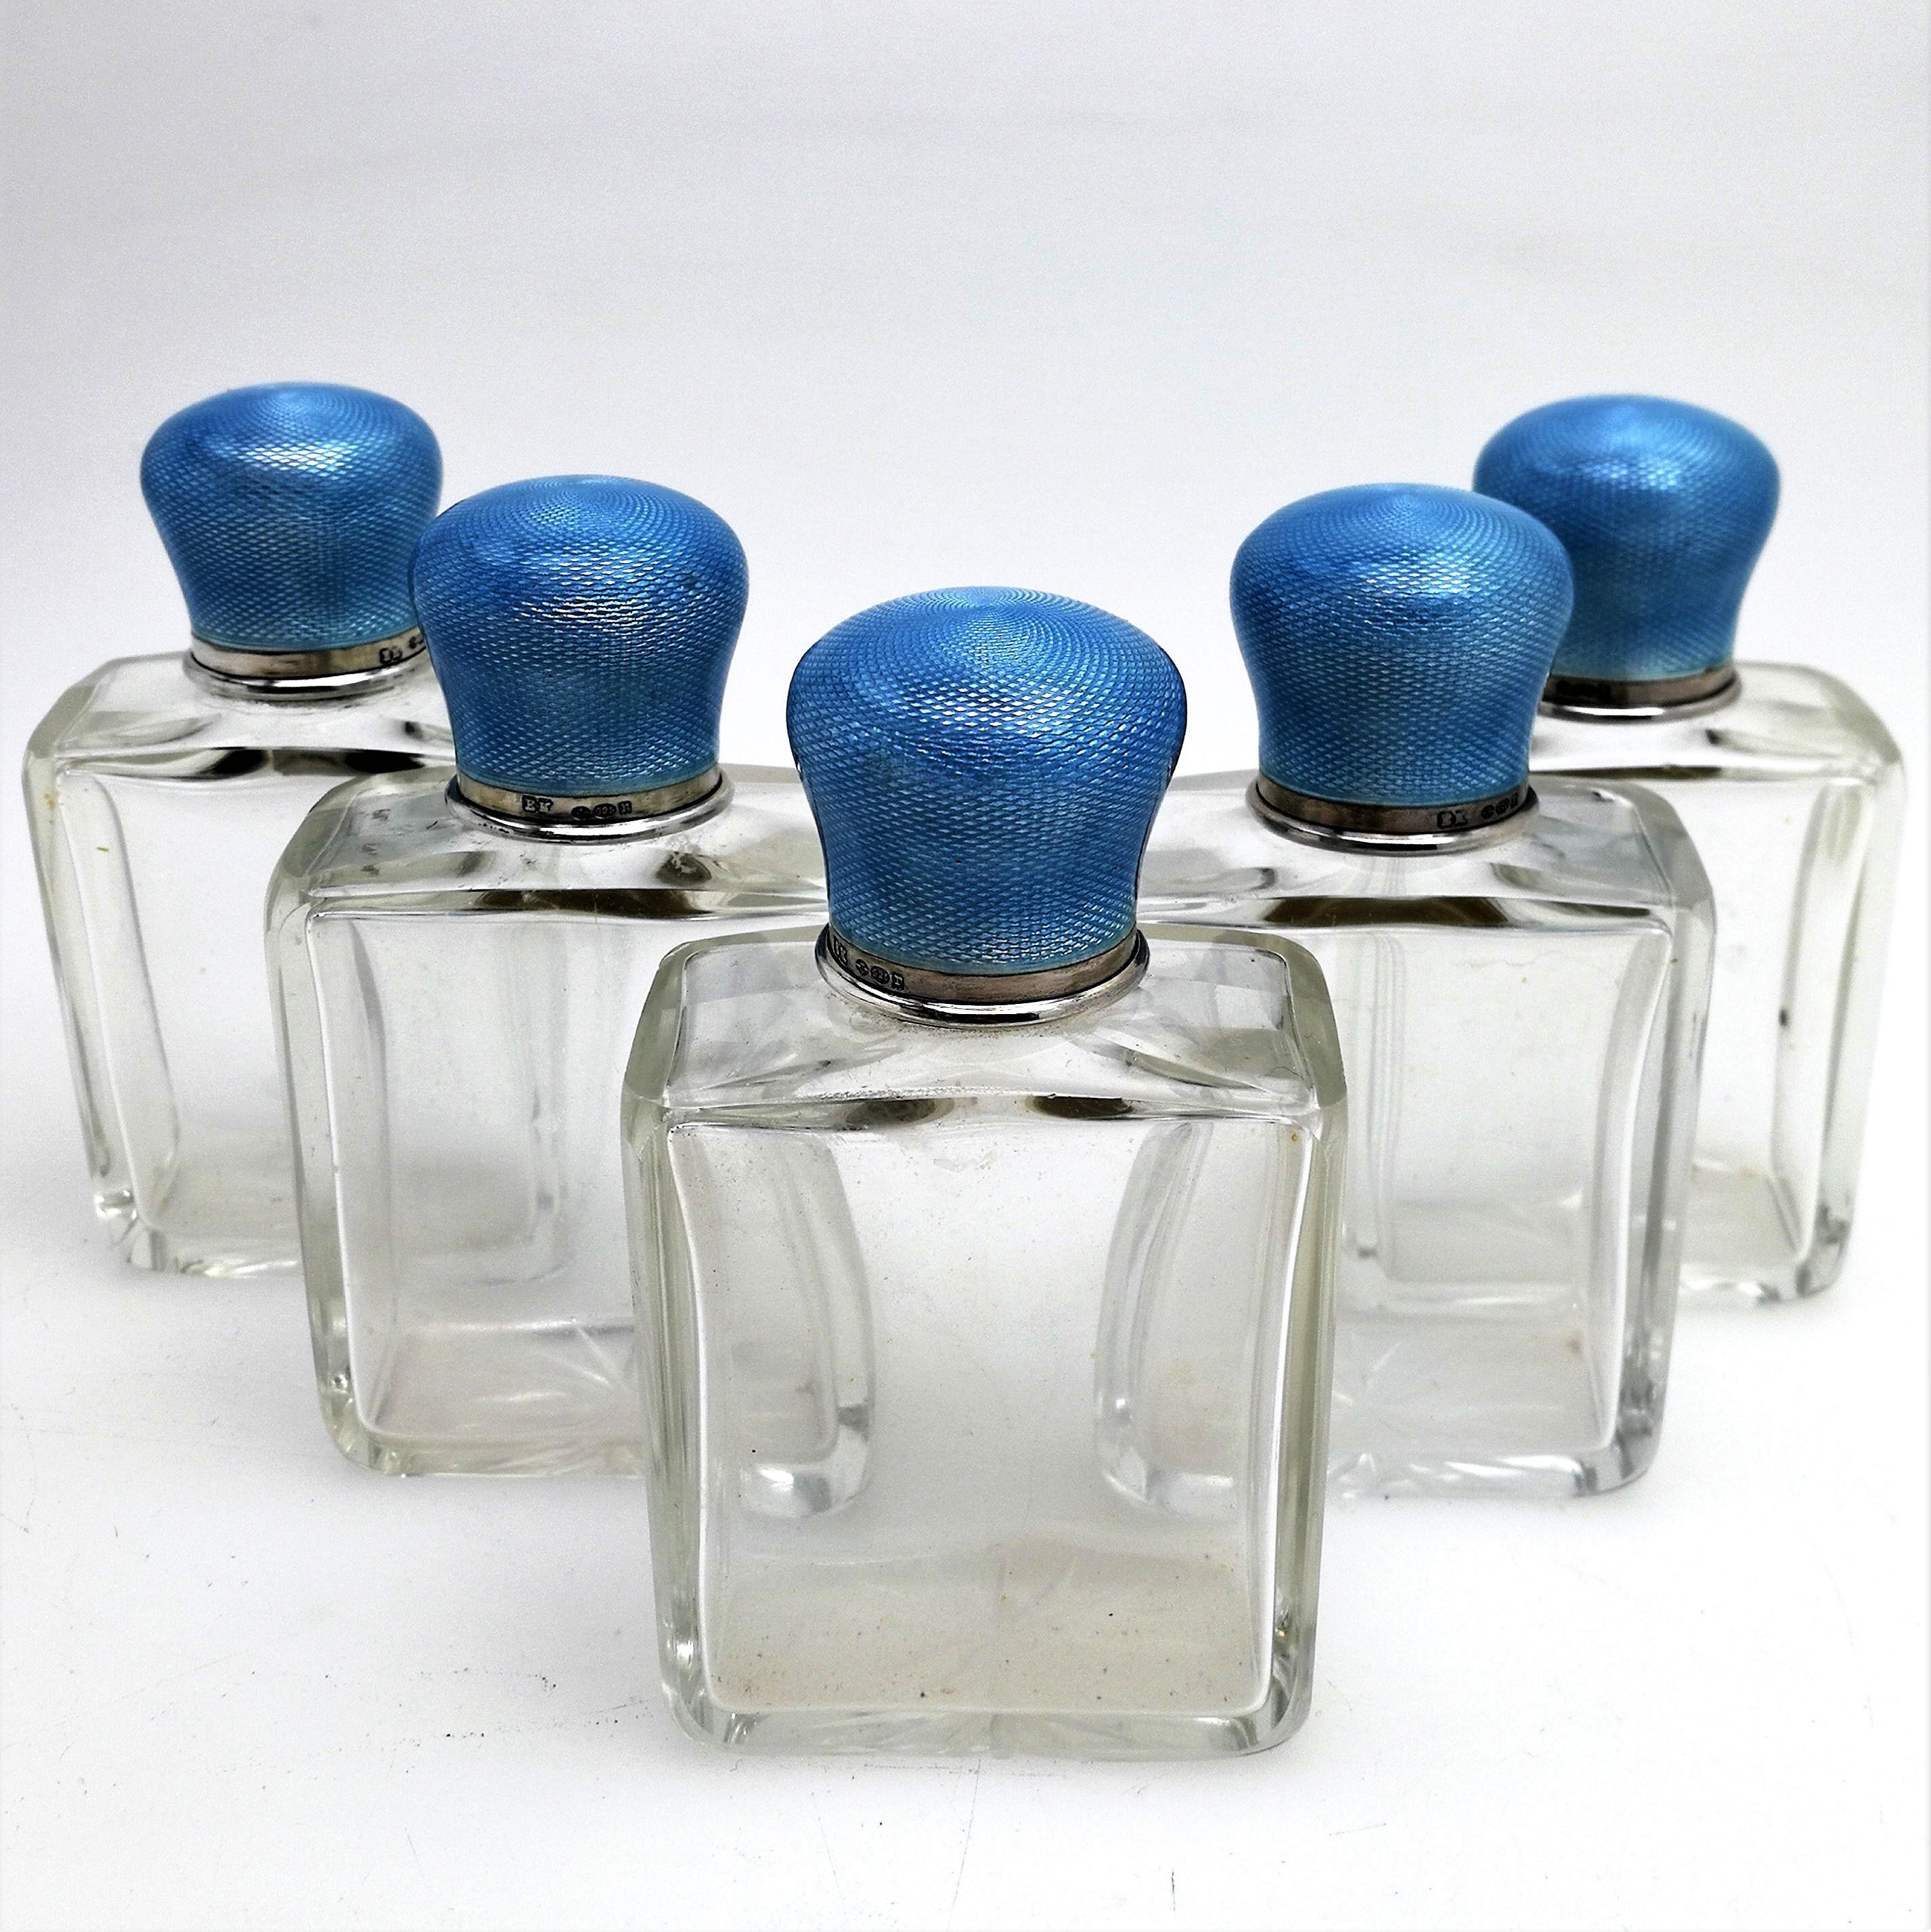 Sterling Silver Set of 5 Silver and Enamel Topped Glass Scent Bottles 1912 Perfume / Cosmetics For Sale